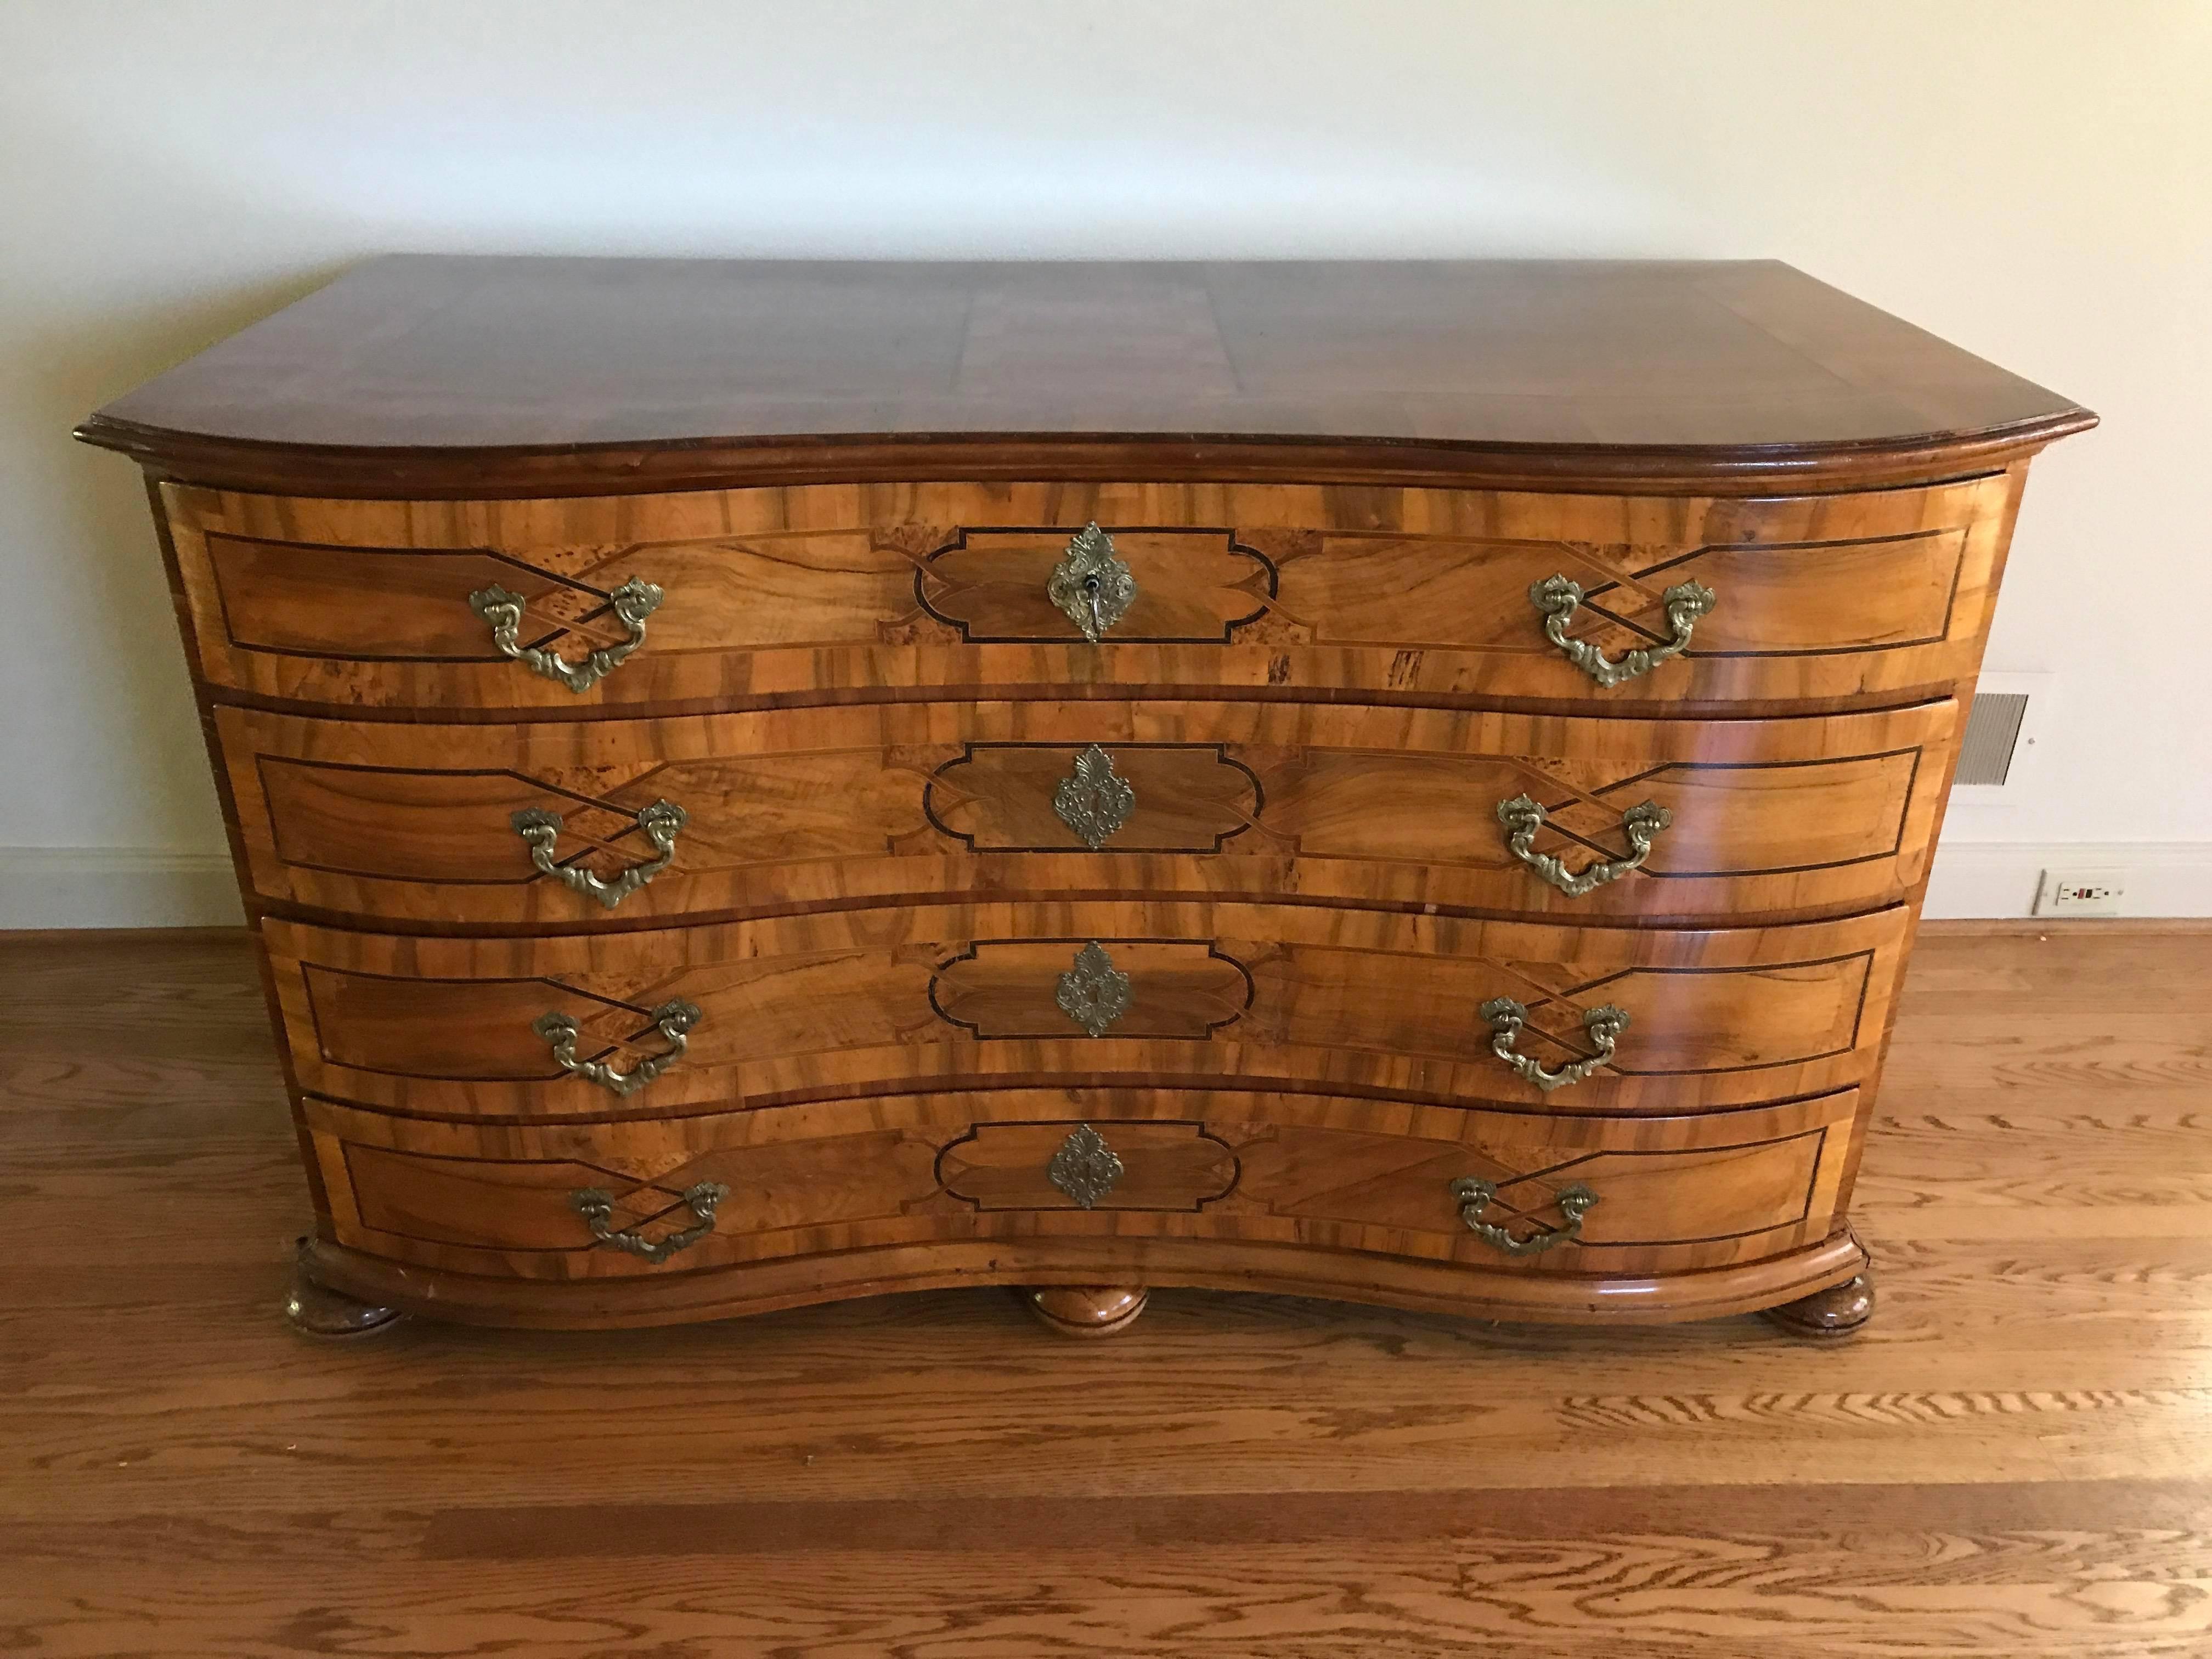 Serpentine front, four full width drawers, top locks with key, German ,circa 1850. Biedermeier design was derivative
of French Empire style furniture with an emphasis on clean lines and minimal ornamentation. This grew out of a basis in utilitarian